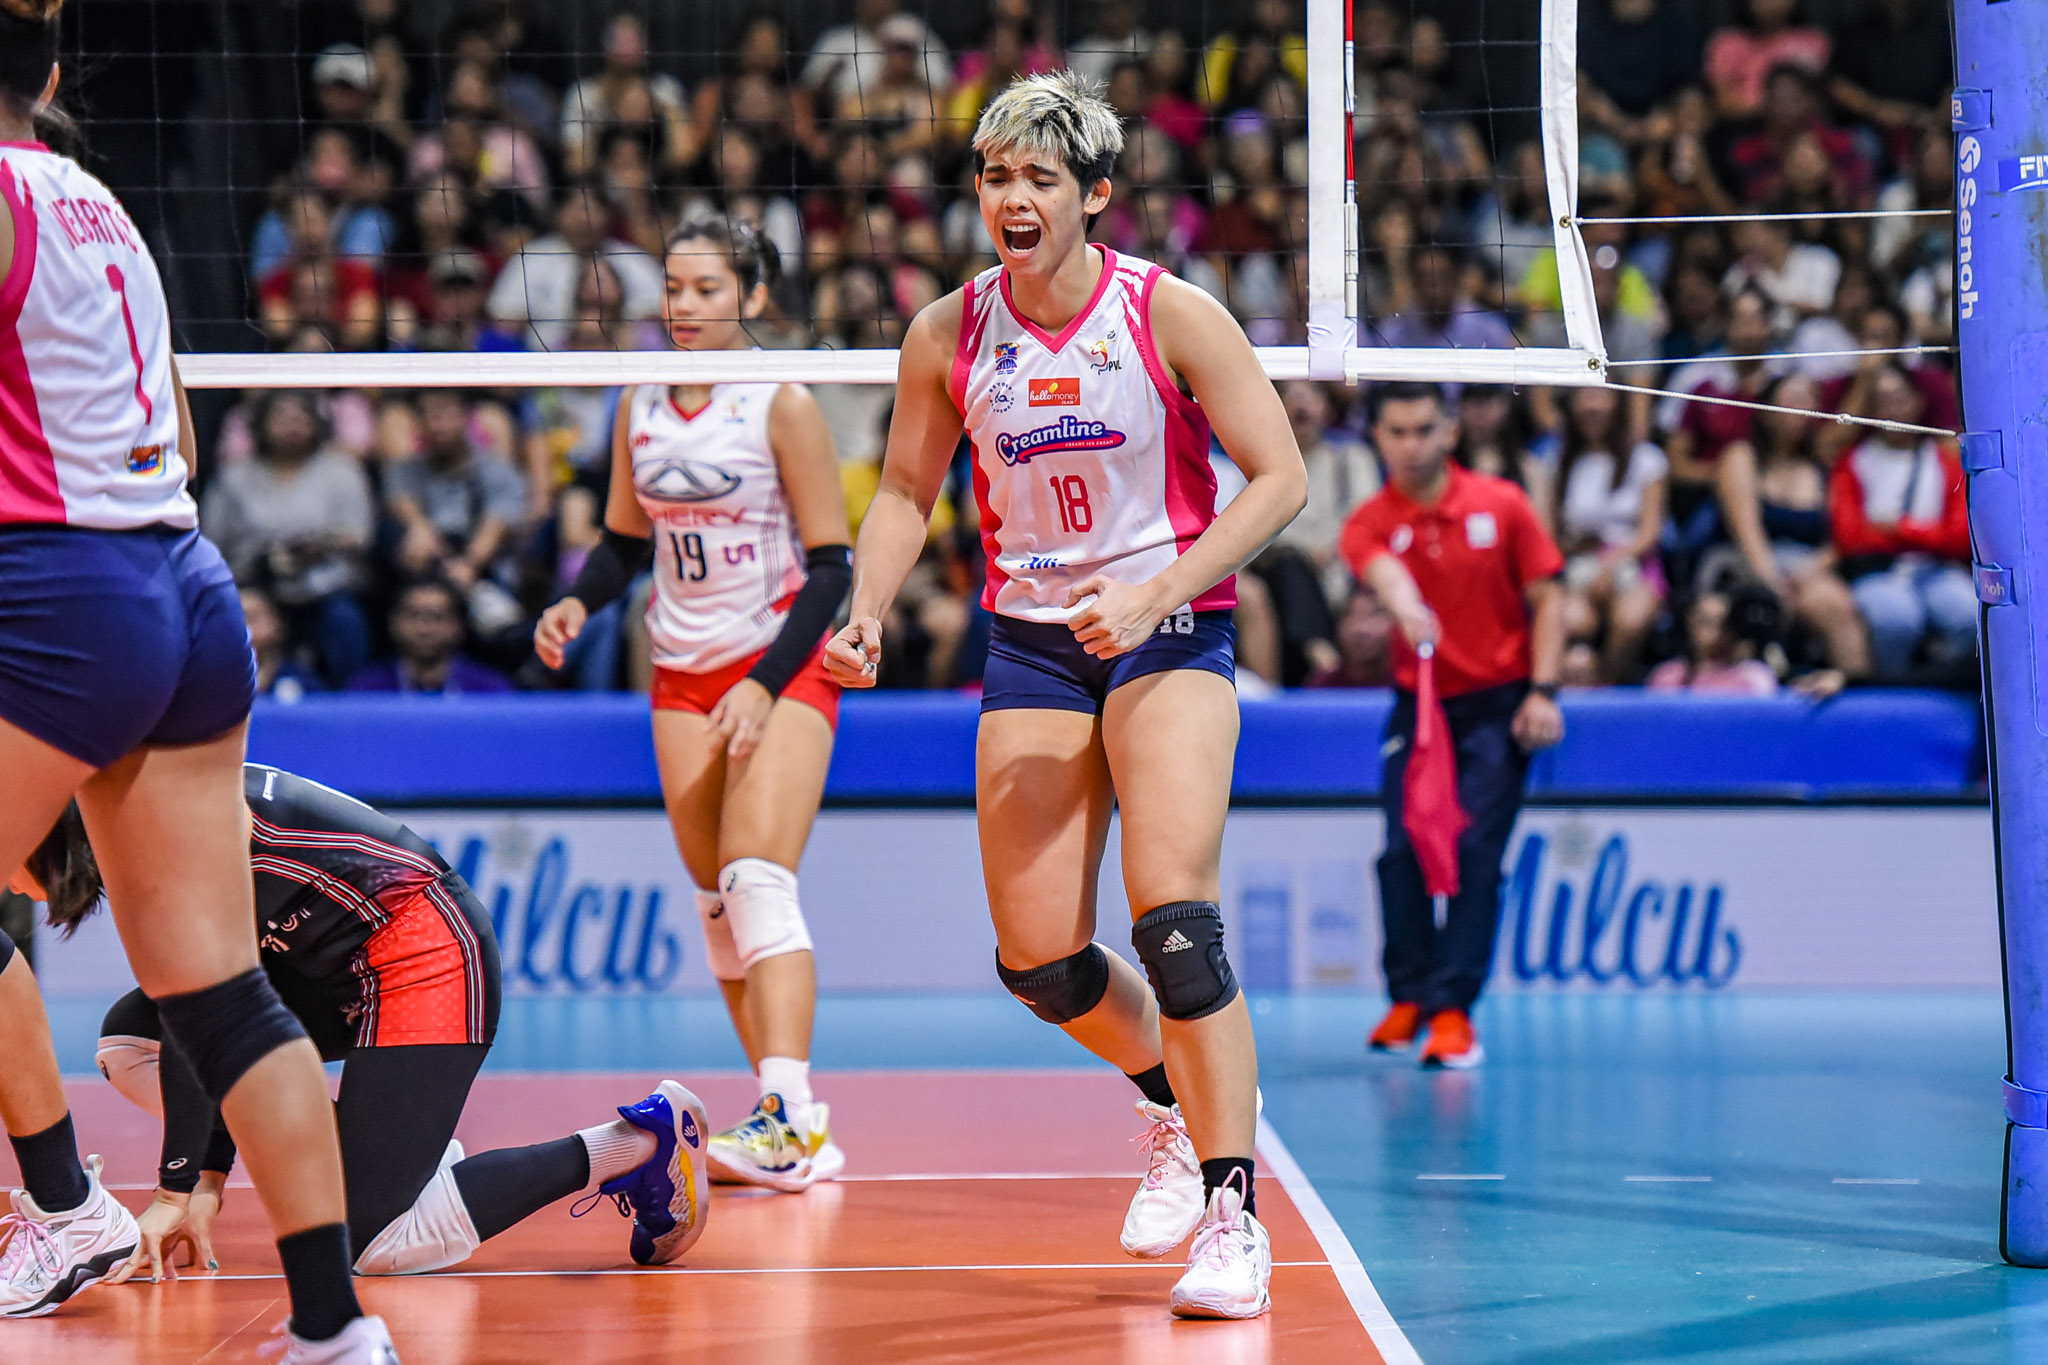 tots carlos: ‘champion mindset’ key for creamline in pvl finals